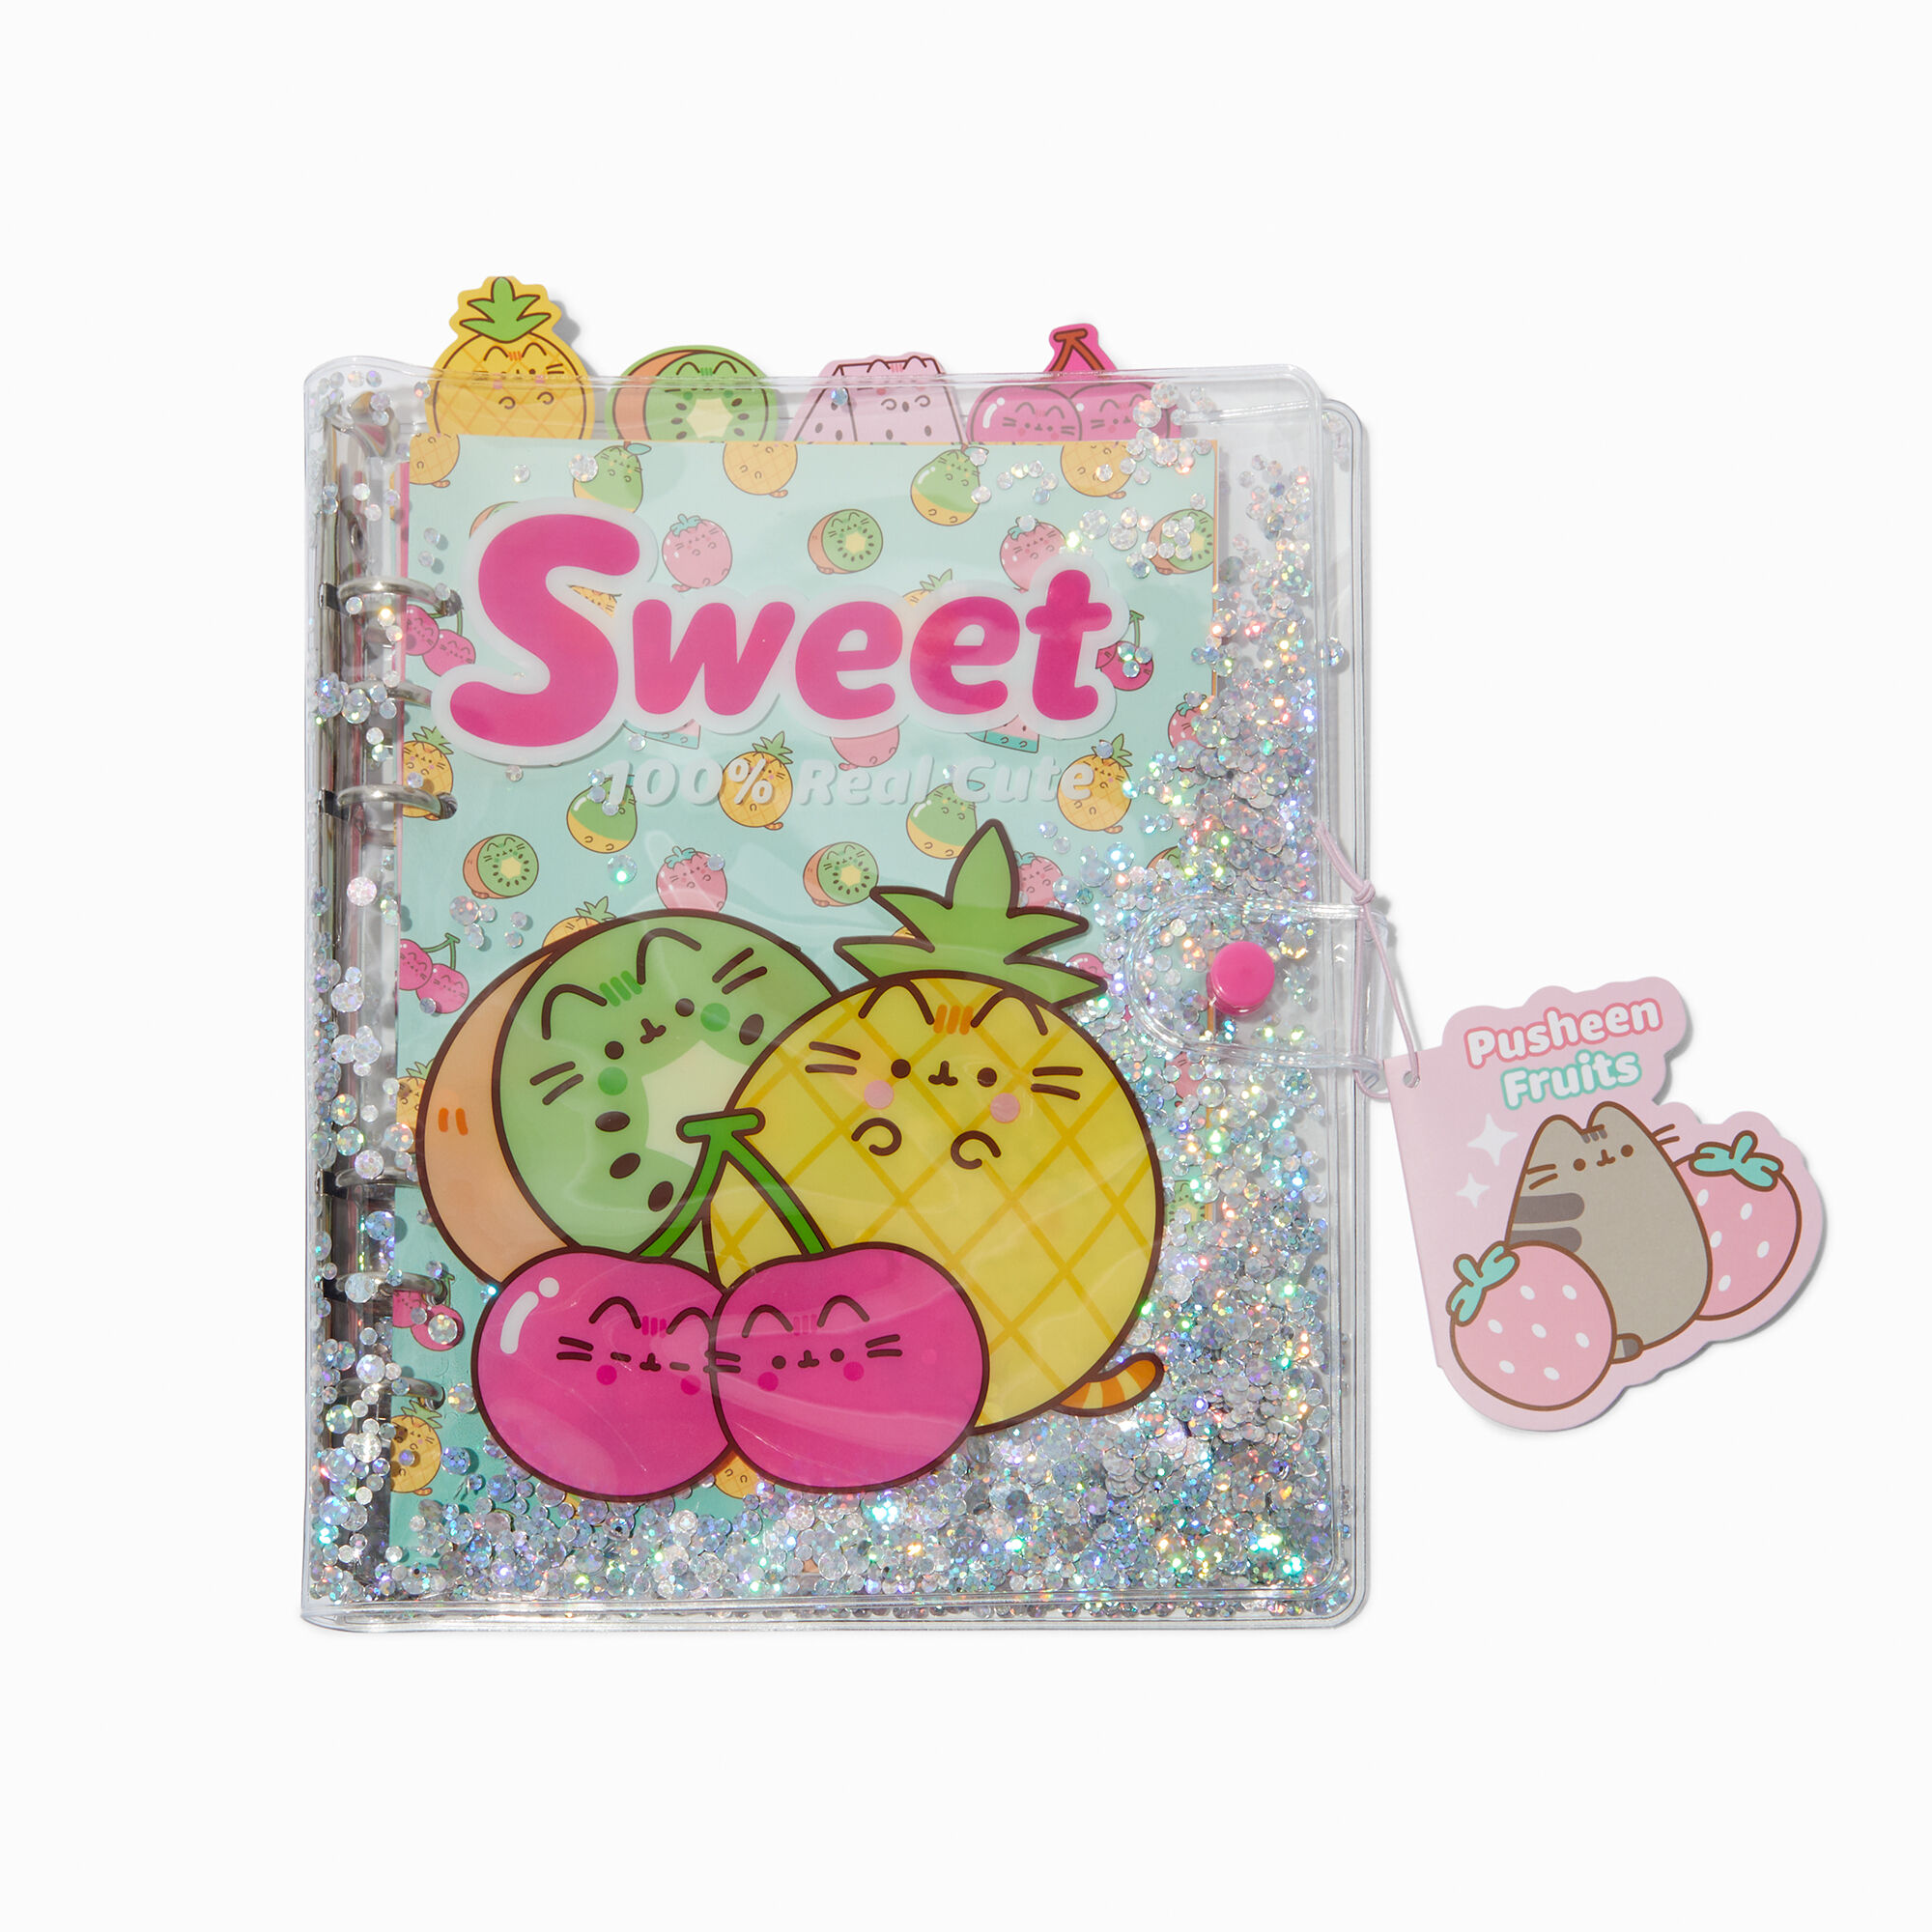 View Claires Pusheen Fruits Shaker Planner information